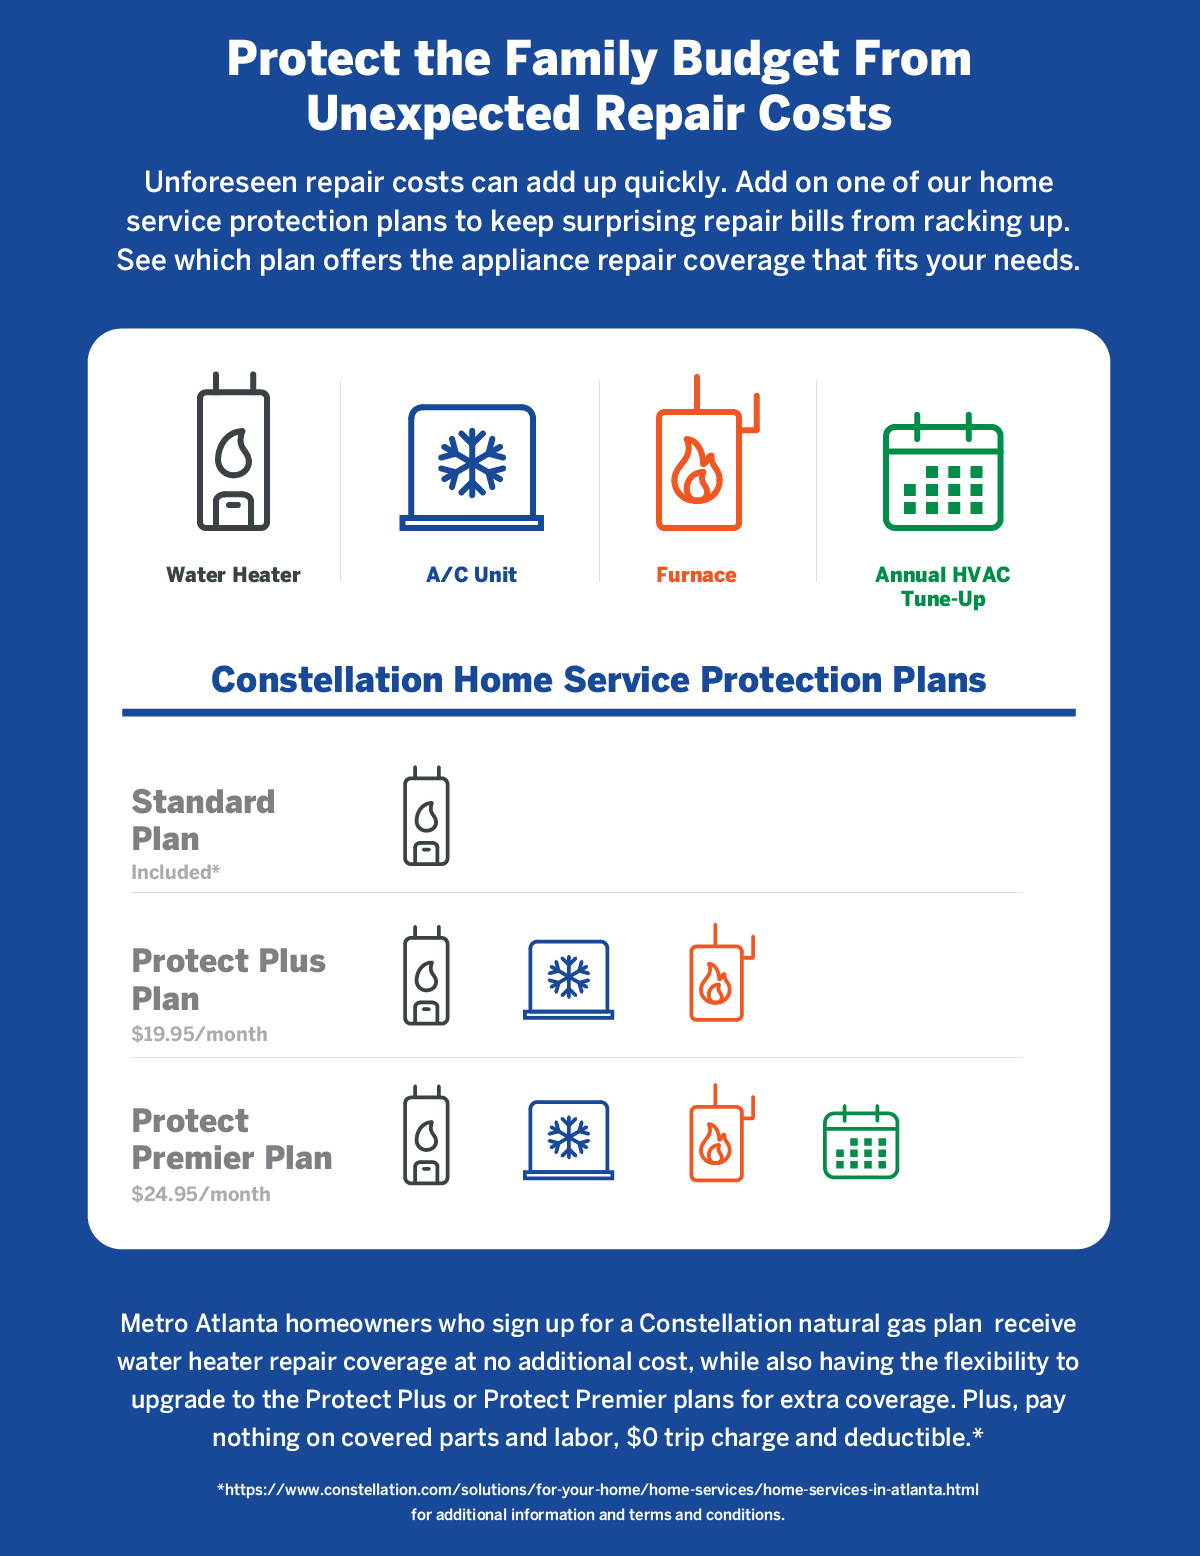 Home Service Protection Plans in Georgia